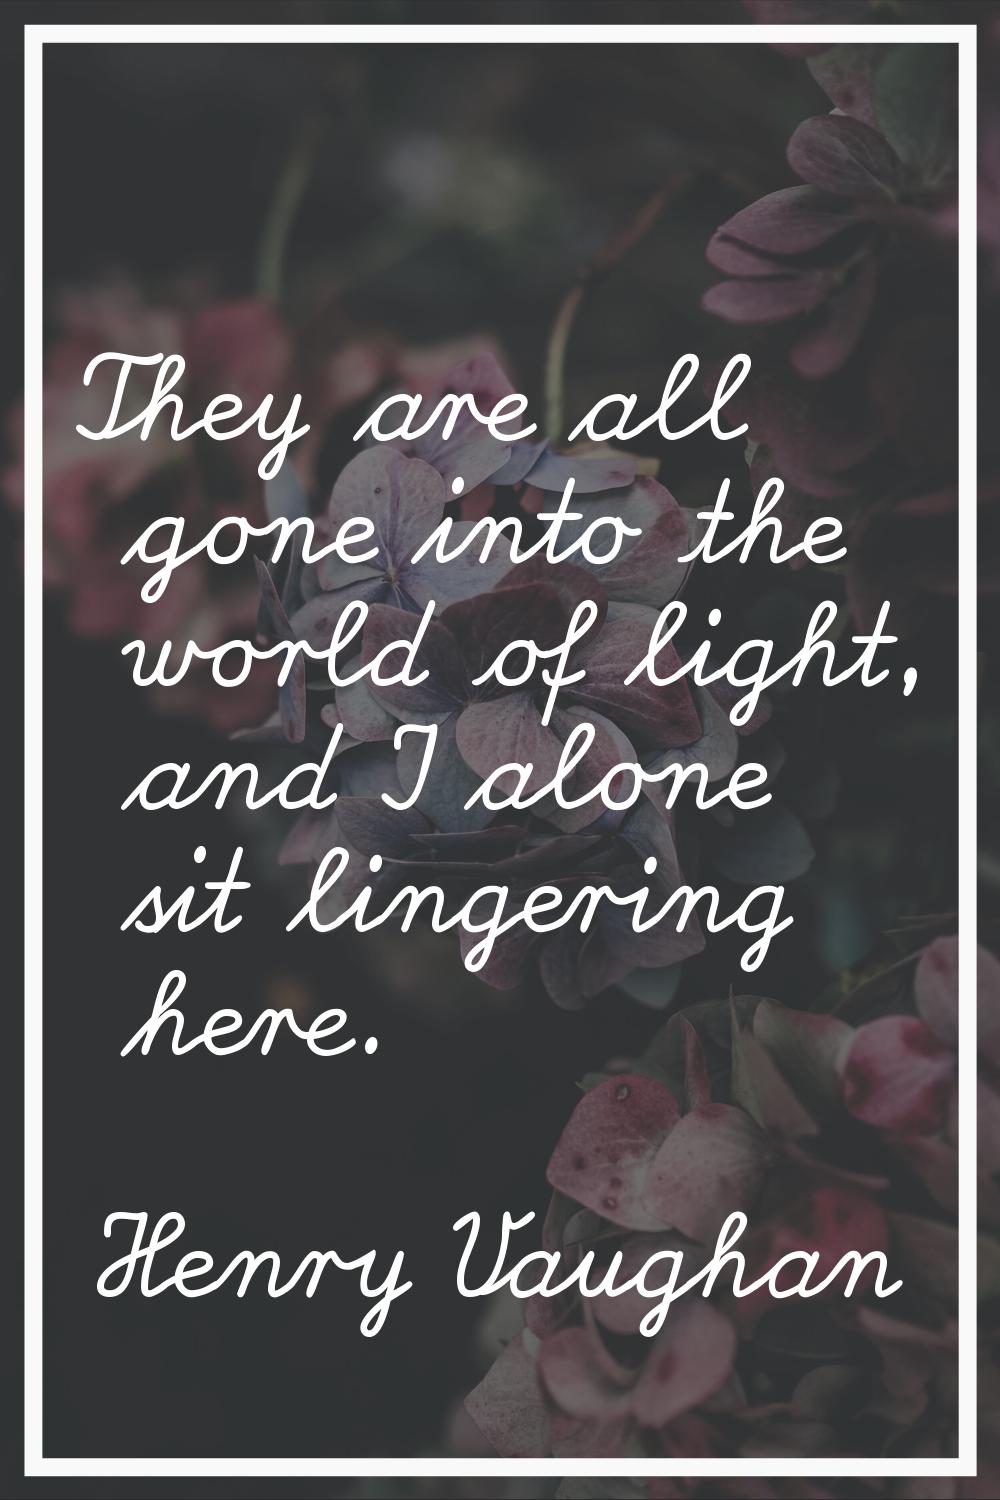 They are all gone into the world of light, and I alone sit lingering here.